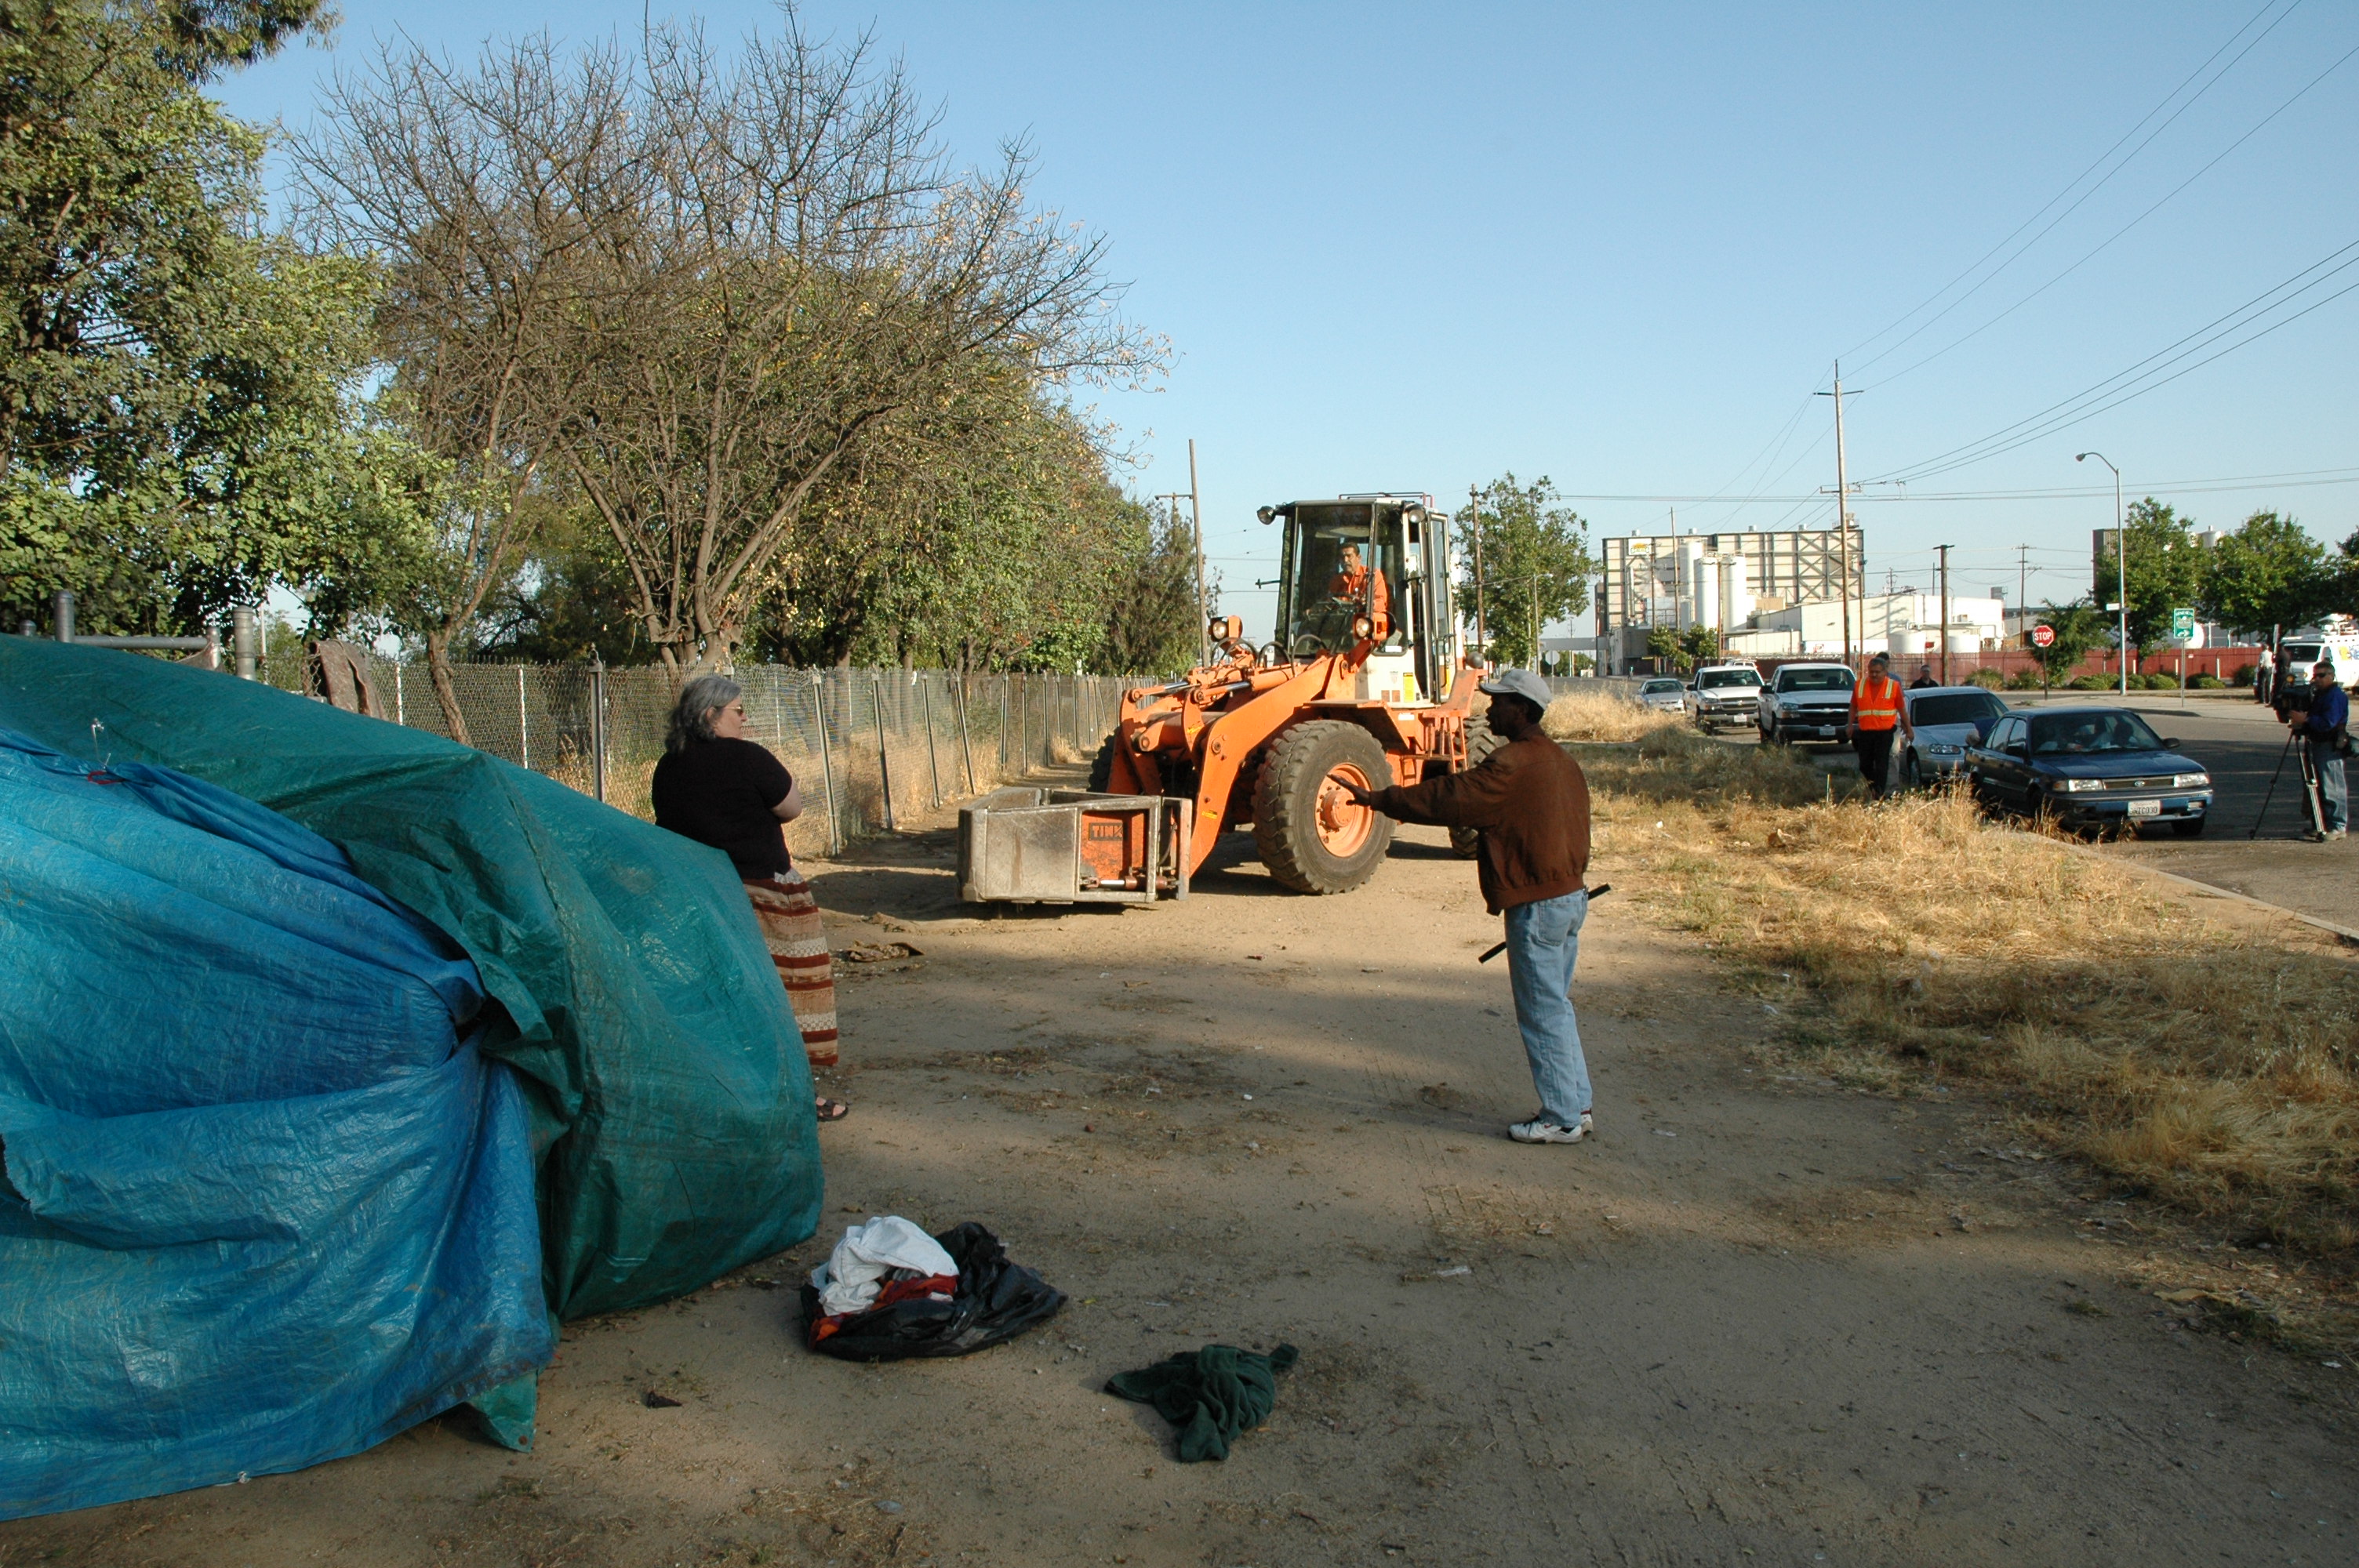 Liza Apper (left) stood in front of this tent and refused to allow the bulldozer to destroy it. Shortly after the bulldozer left, Twist (a homeless man) emerged from the tent. He had been sleeping and would have been picked up by the bulldozer, put into a garbage truck and taken to the dump if Liza had not held her ground. Nobody knew that Twist was in the tent until after he came out.